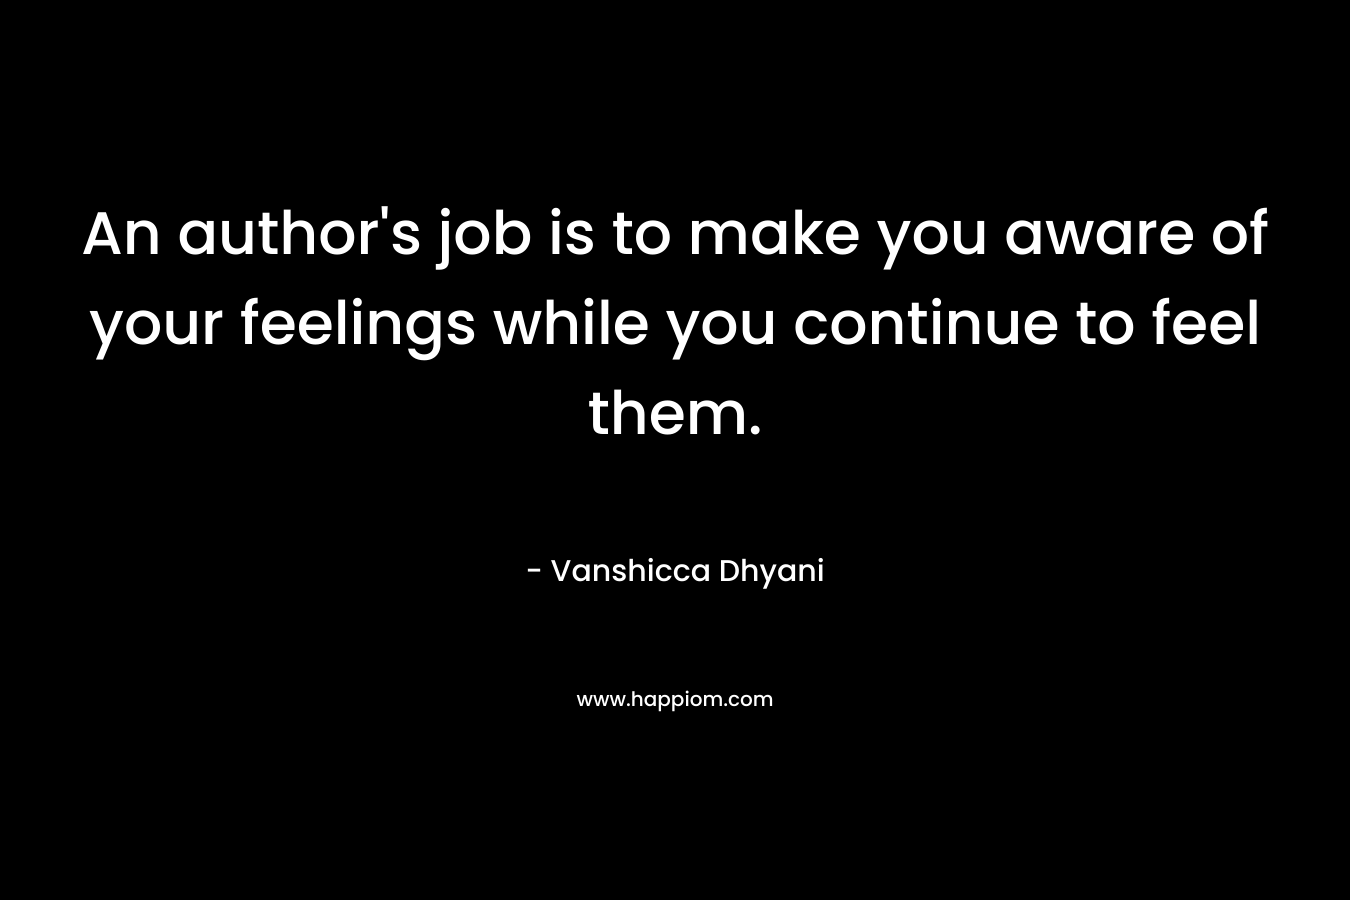 An author’s job is to make you aware of your feelings while you continue to feel them. – Vanshicca Dhyani